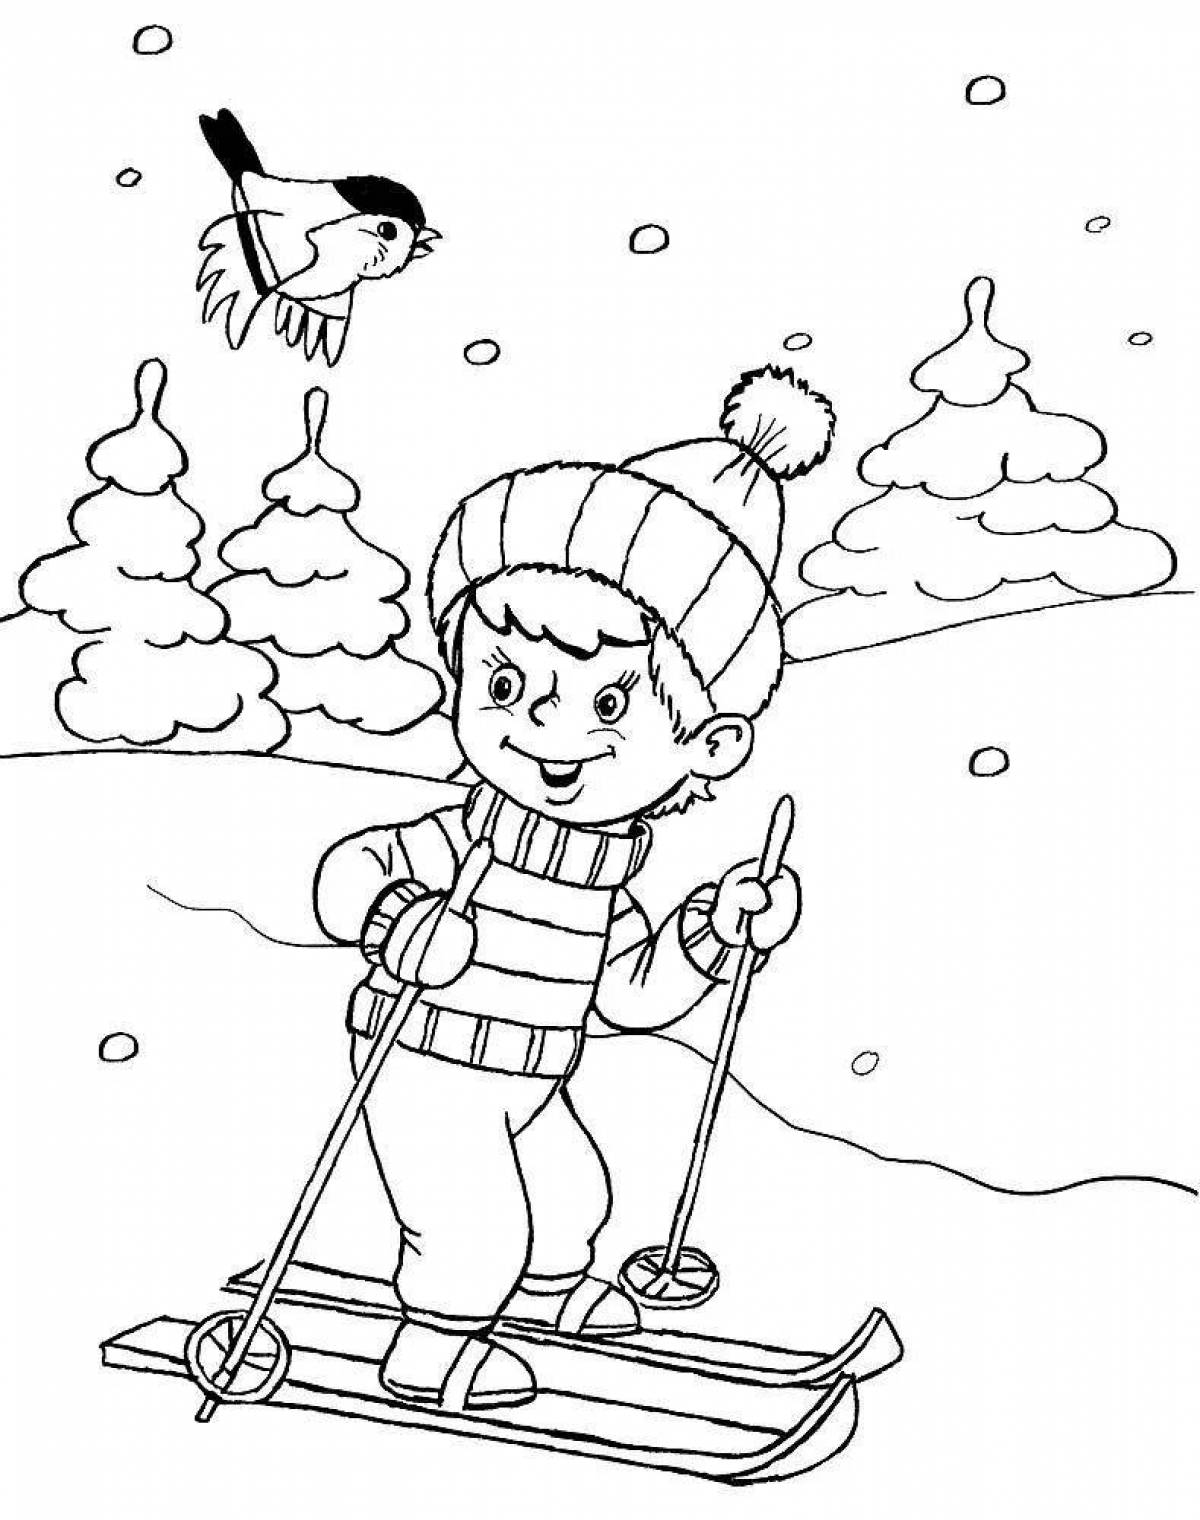 Coloring page confident baby skier